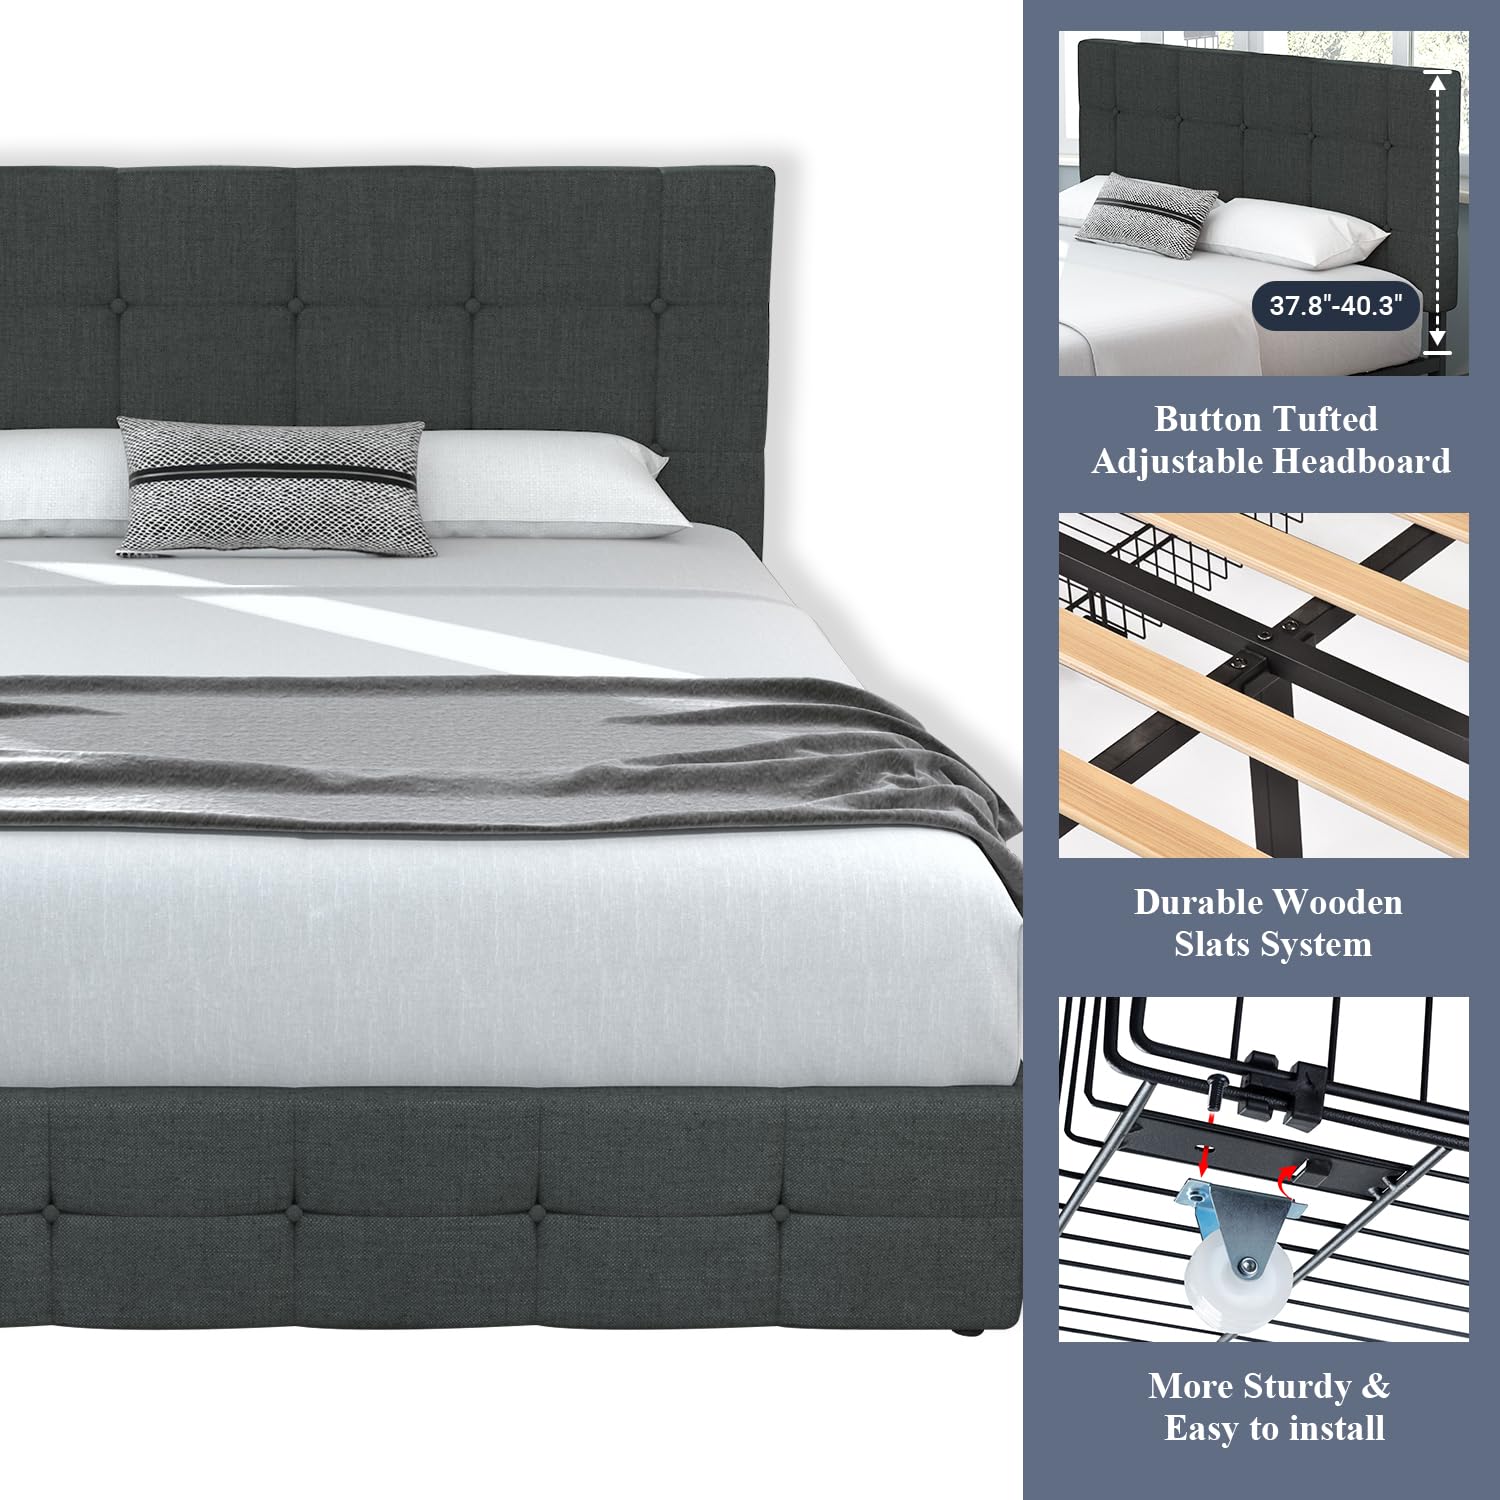 Upholstered Queen Size Platform Bed Frame with 4 Storage Drawers and Headboard